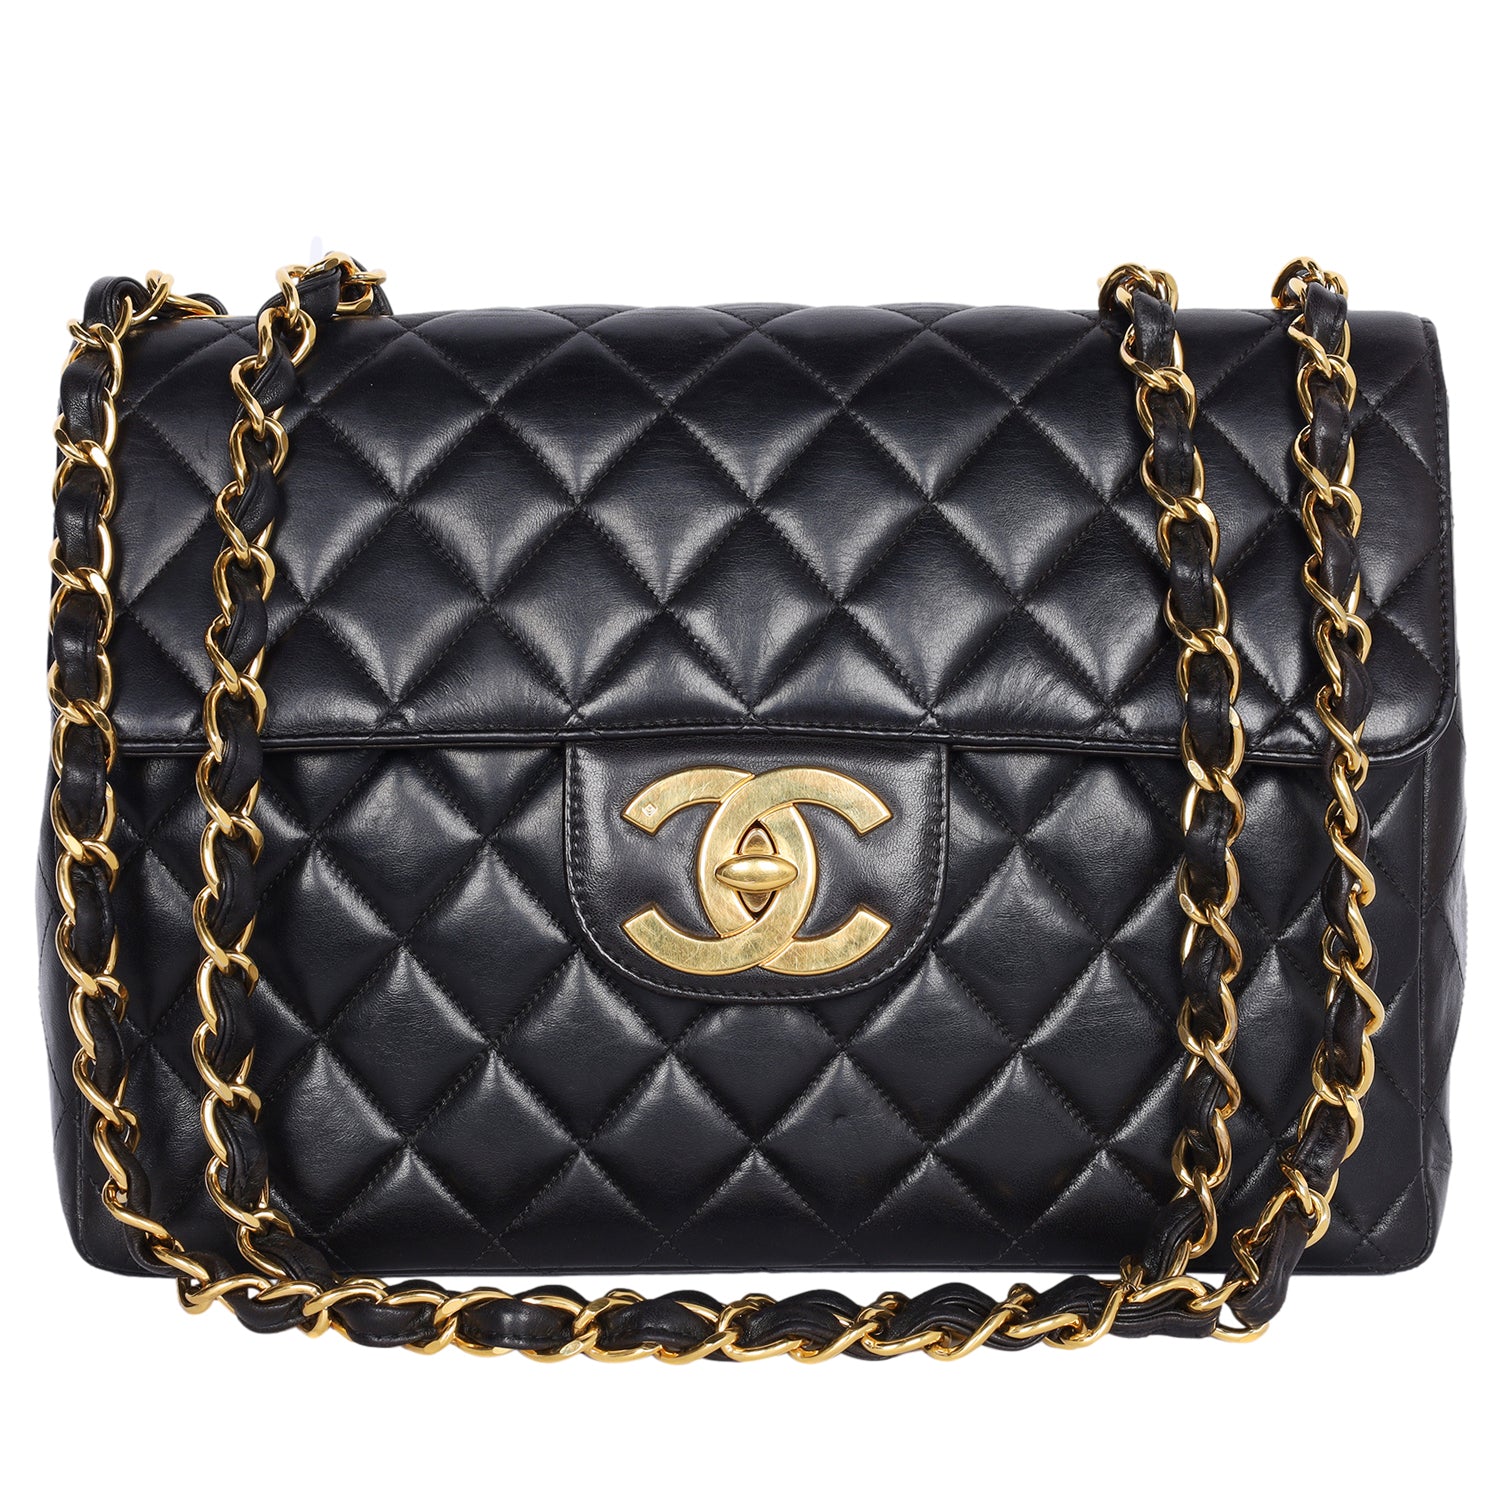 Vintage Chanel Black Quilted Jumbo Classic Flap Bag (Authentic Pre